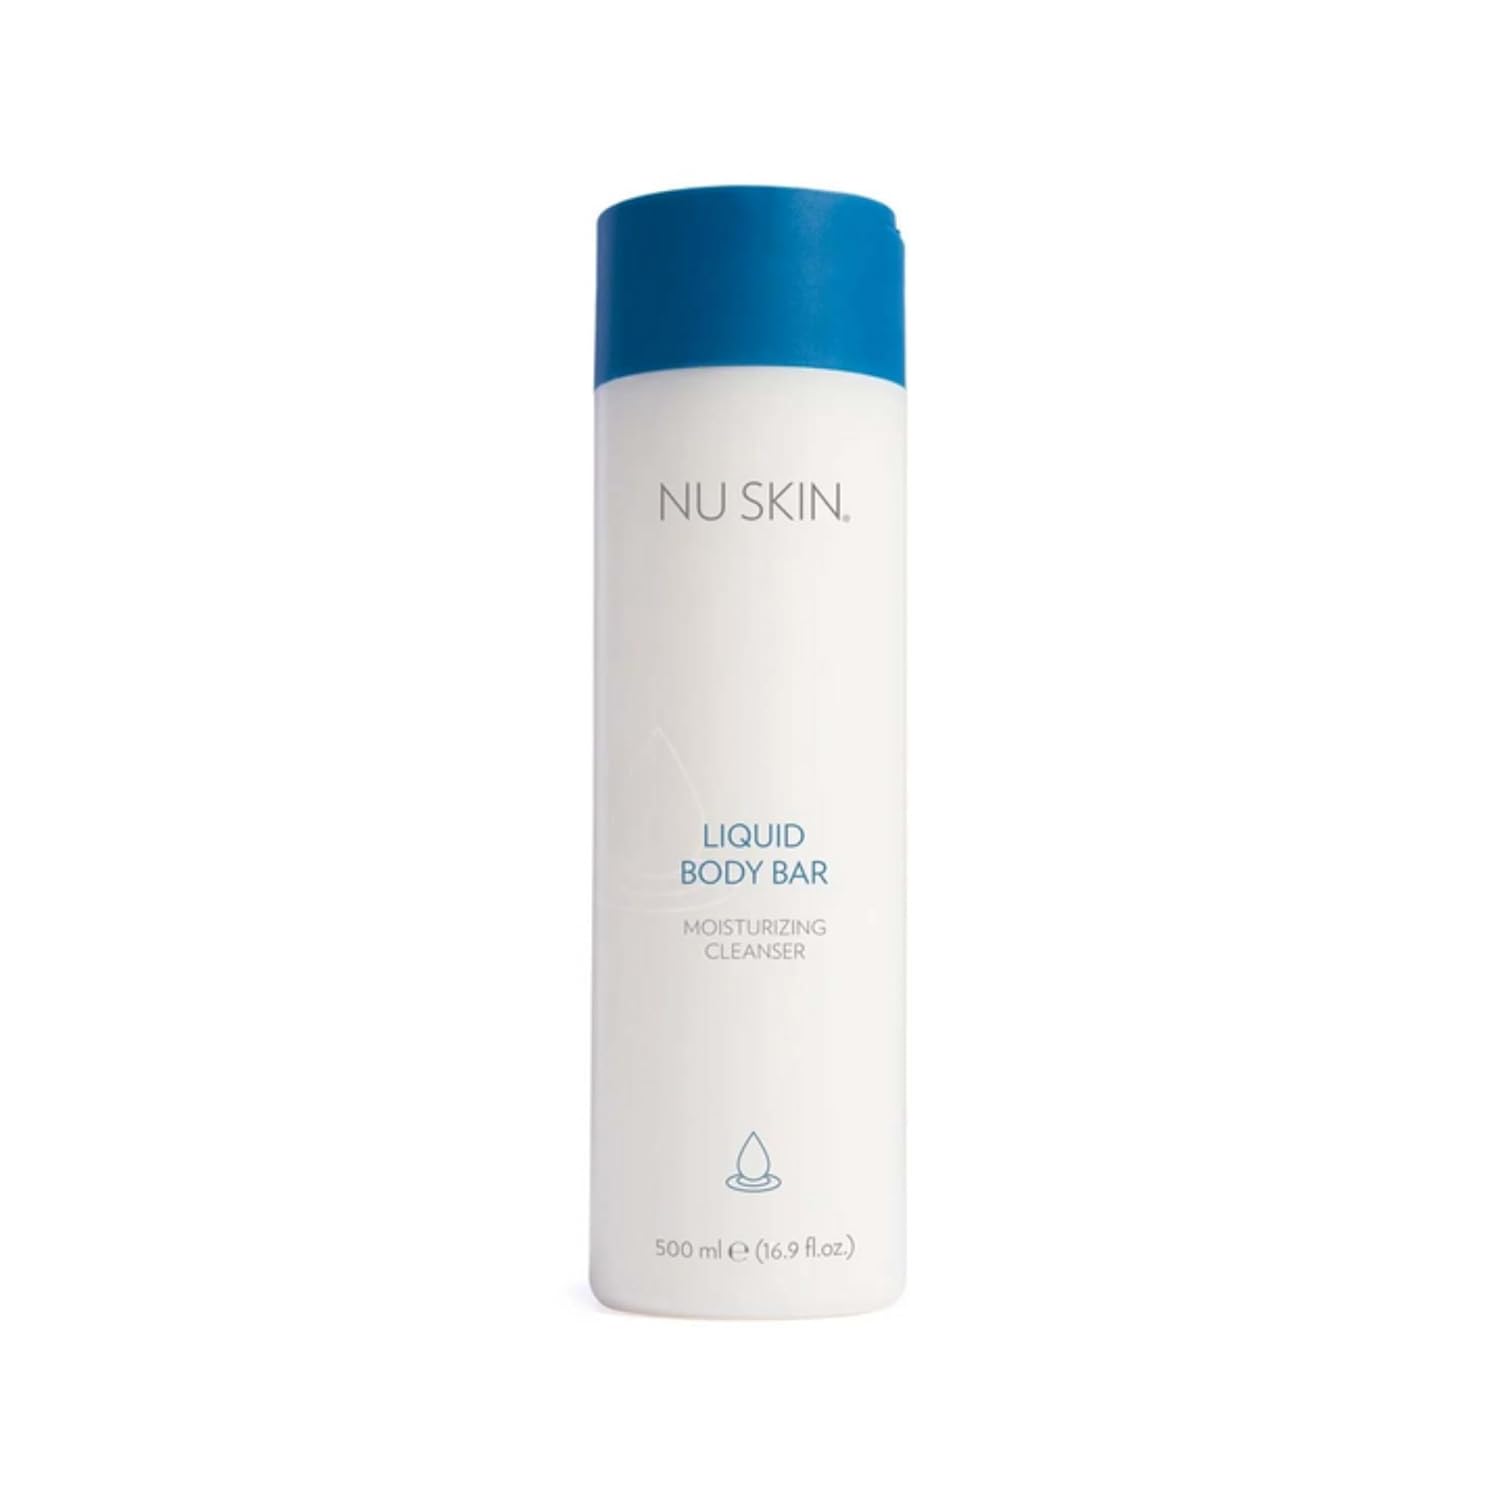 Nu Skin Liquid Body Bar Moisturizing Cleanser | pH Balanced, Soap-free Body Wash Nurtures Skin Grapefruit Scent Ensures a Refreshing and Hydrating Shower Experience For Personal Skin Care (16.9 Fl Oz)